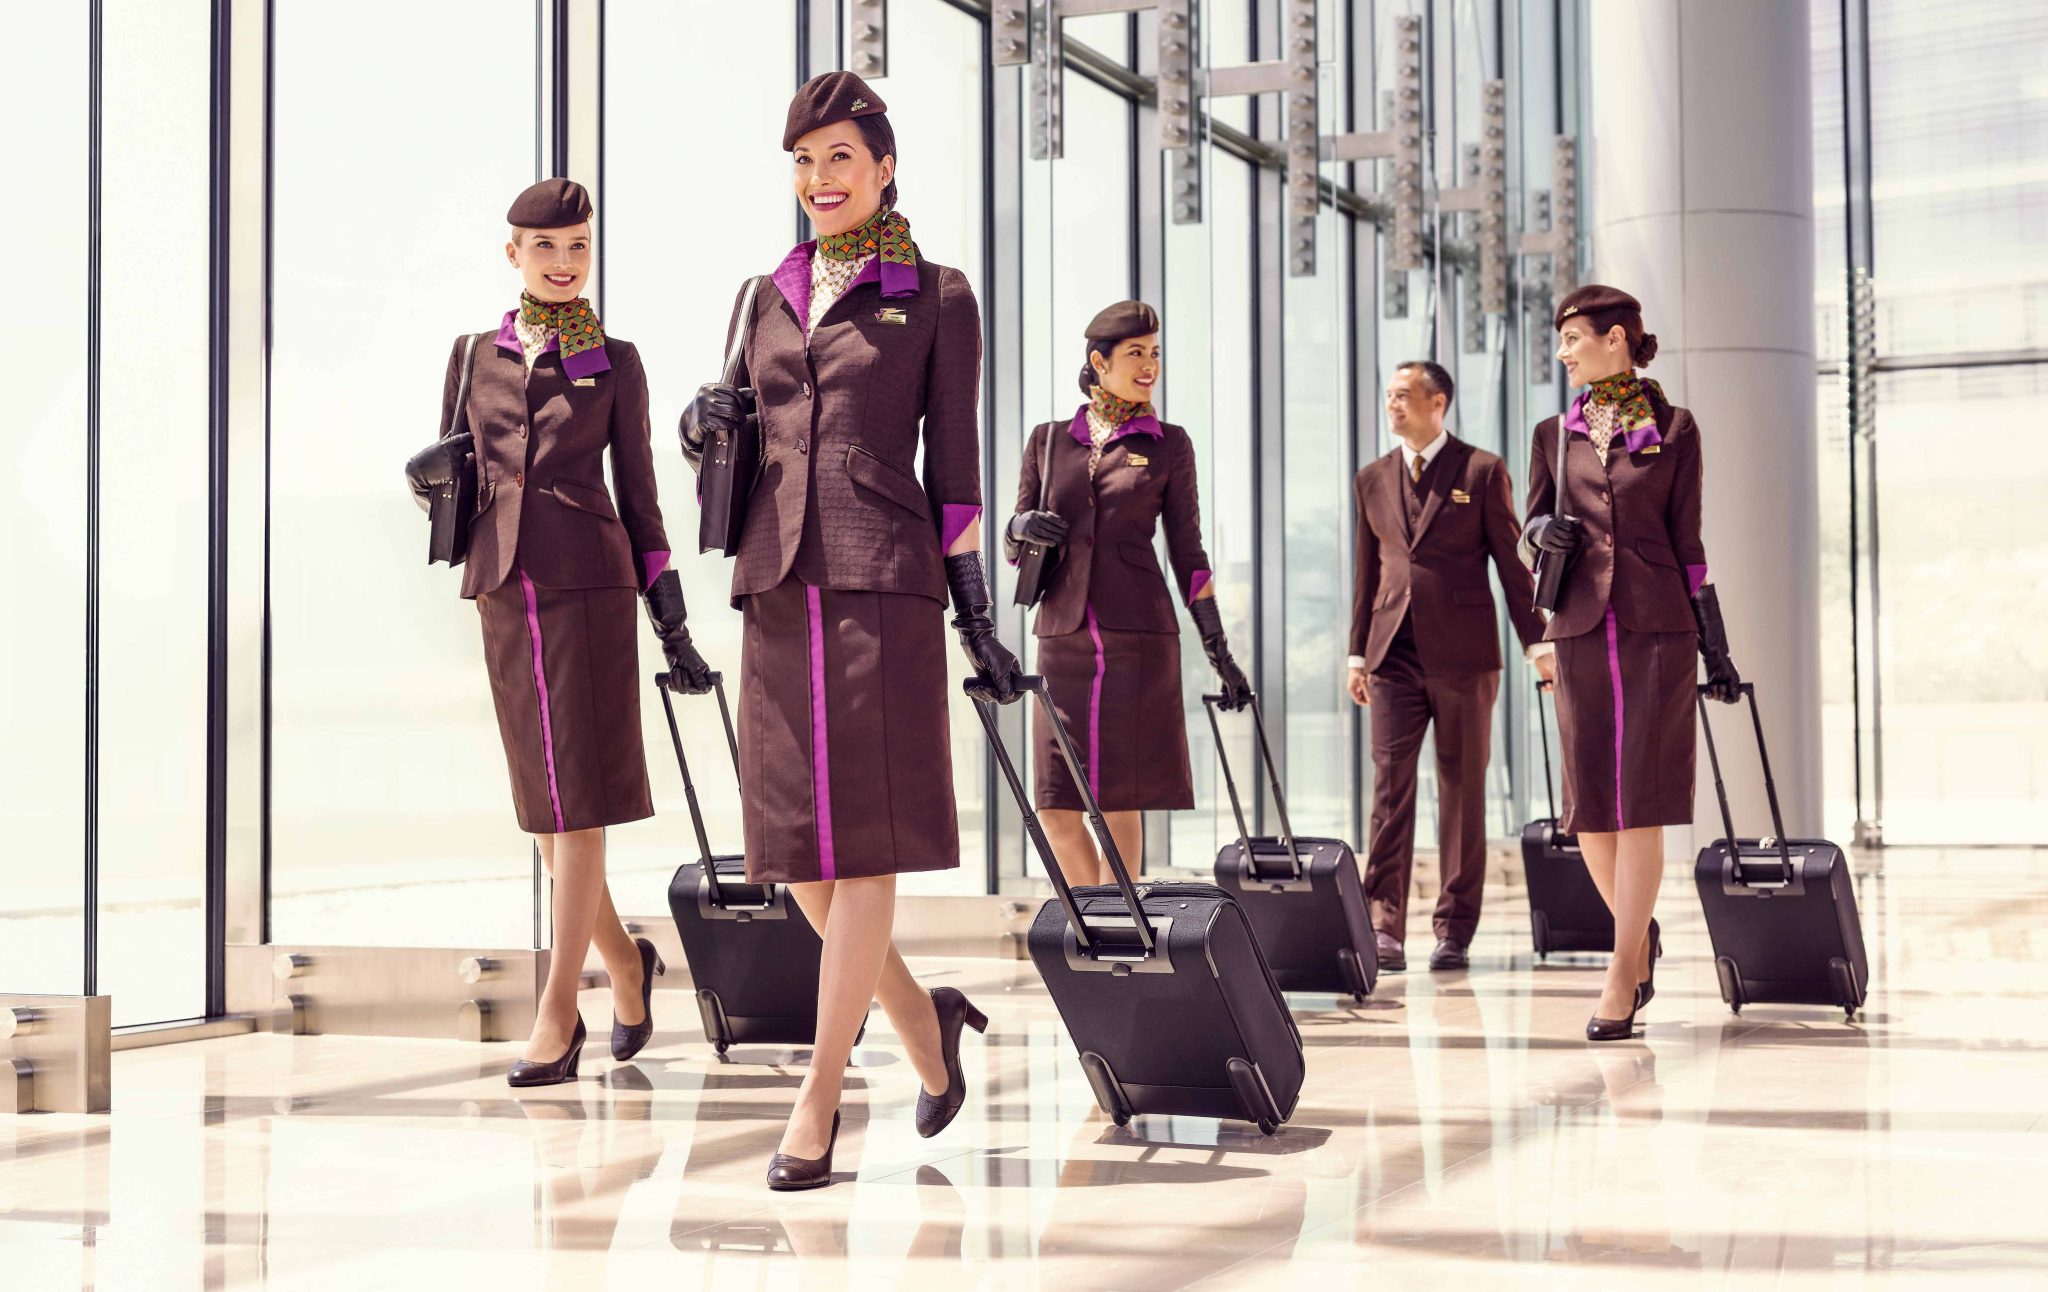 Etihad Airways is Finally Hiring New Cabin Crew Again - But Successful On Hold Candidates Will Have to Reapply